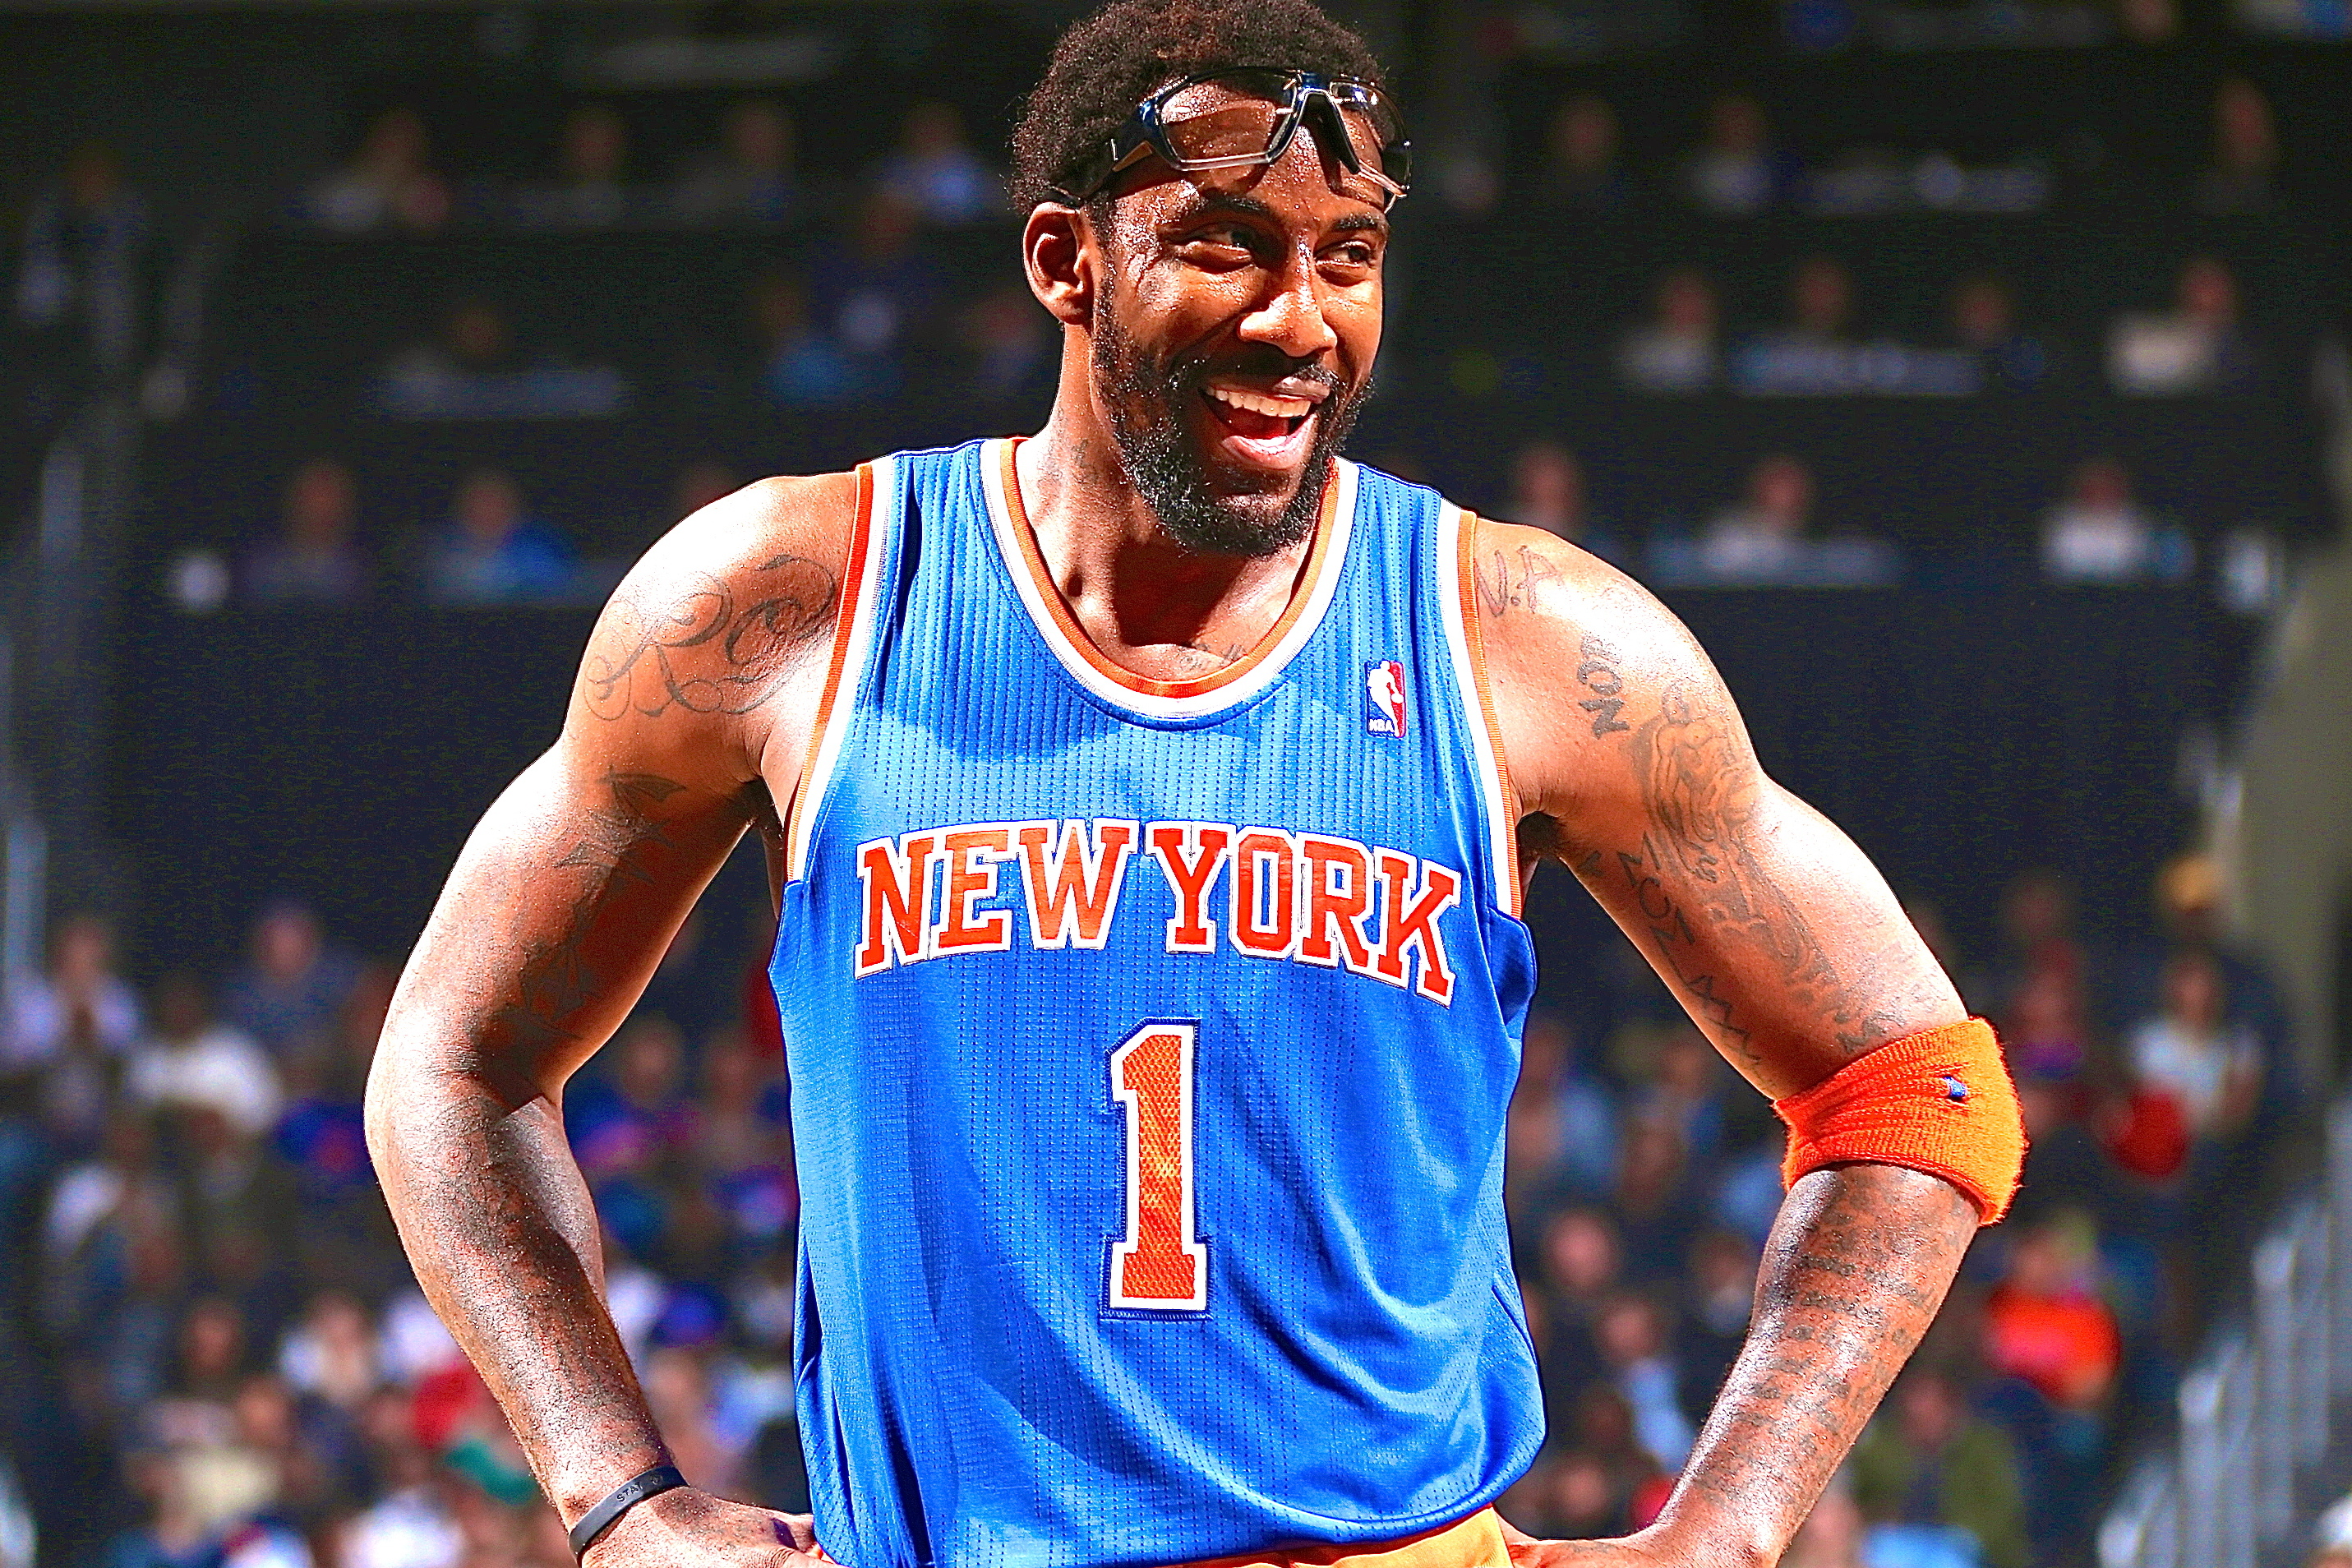 Amar'e Stoudemire on his favorite Phoenix Suns memory: Being the